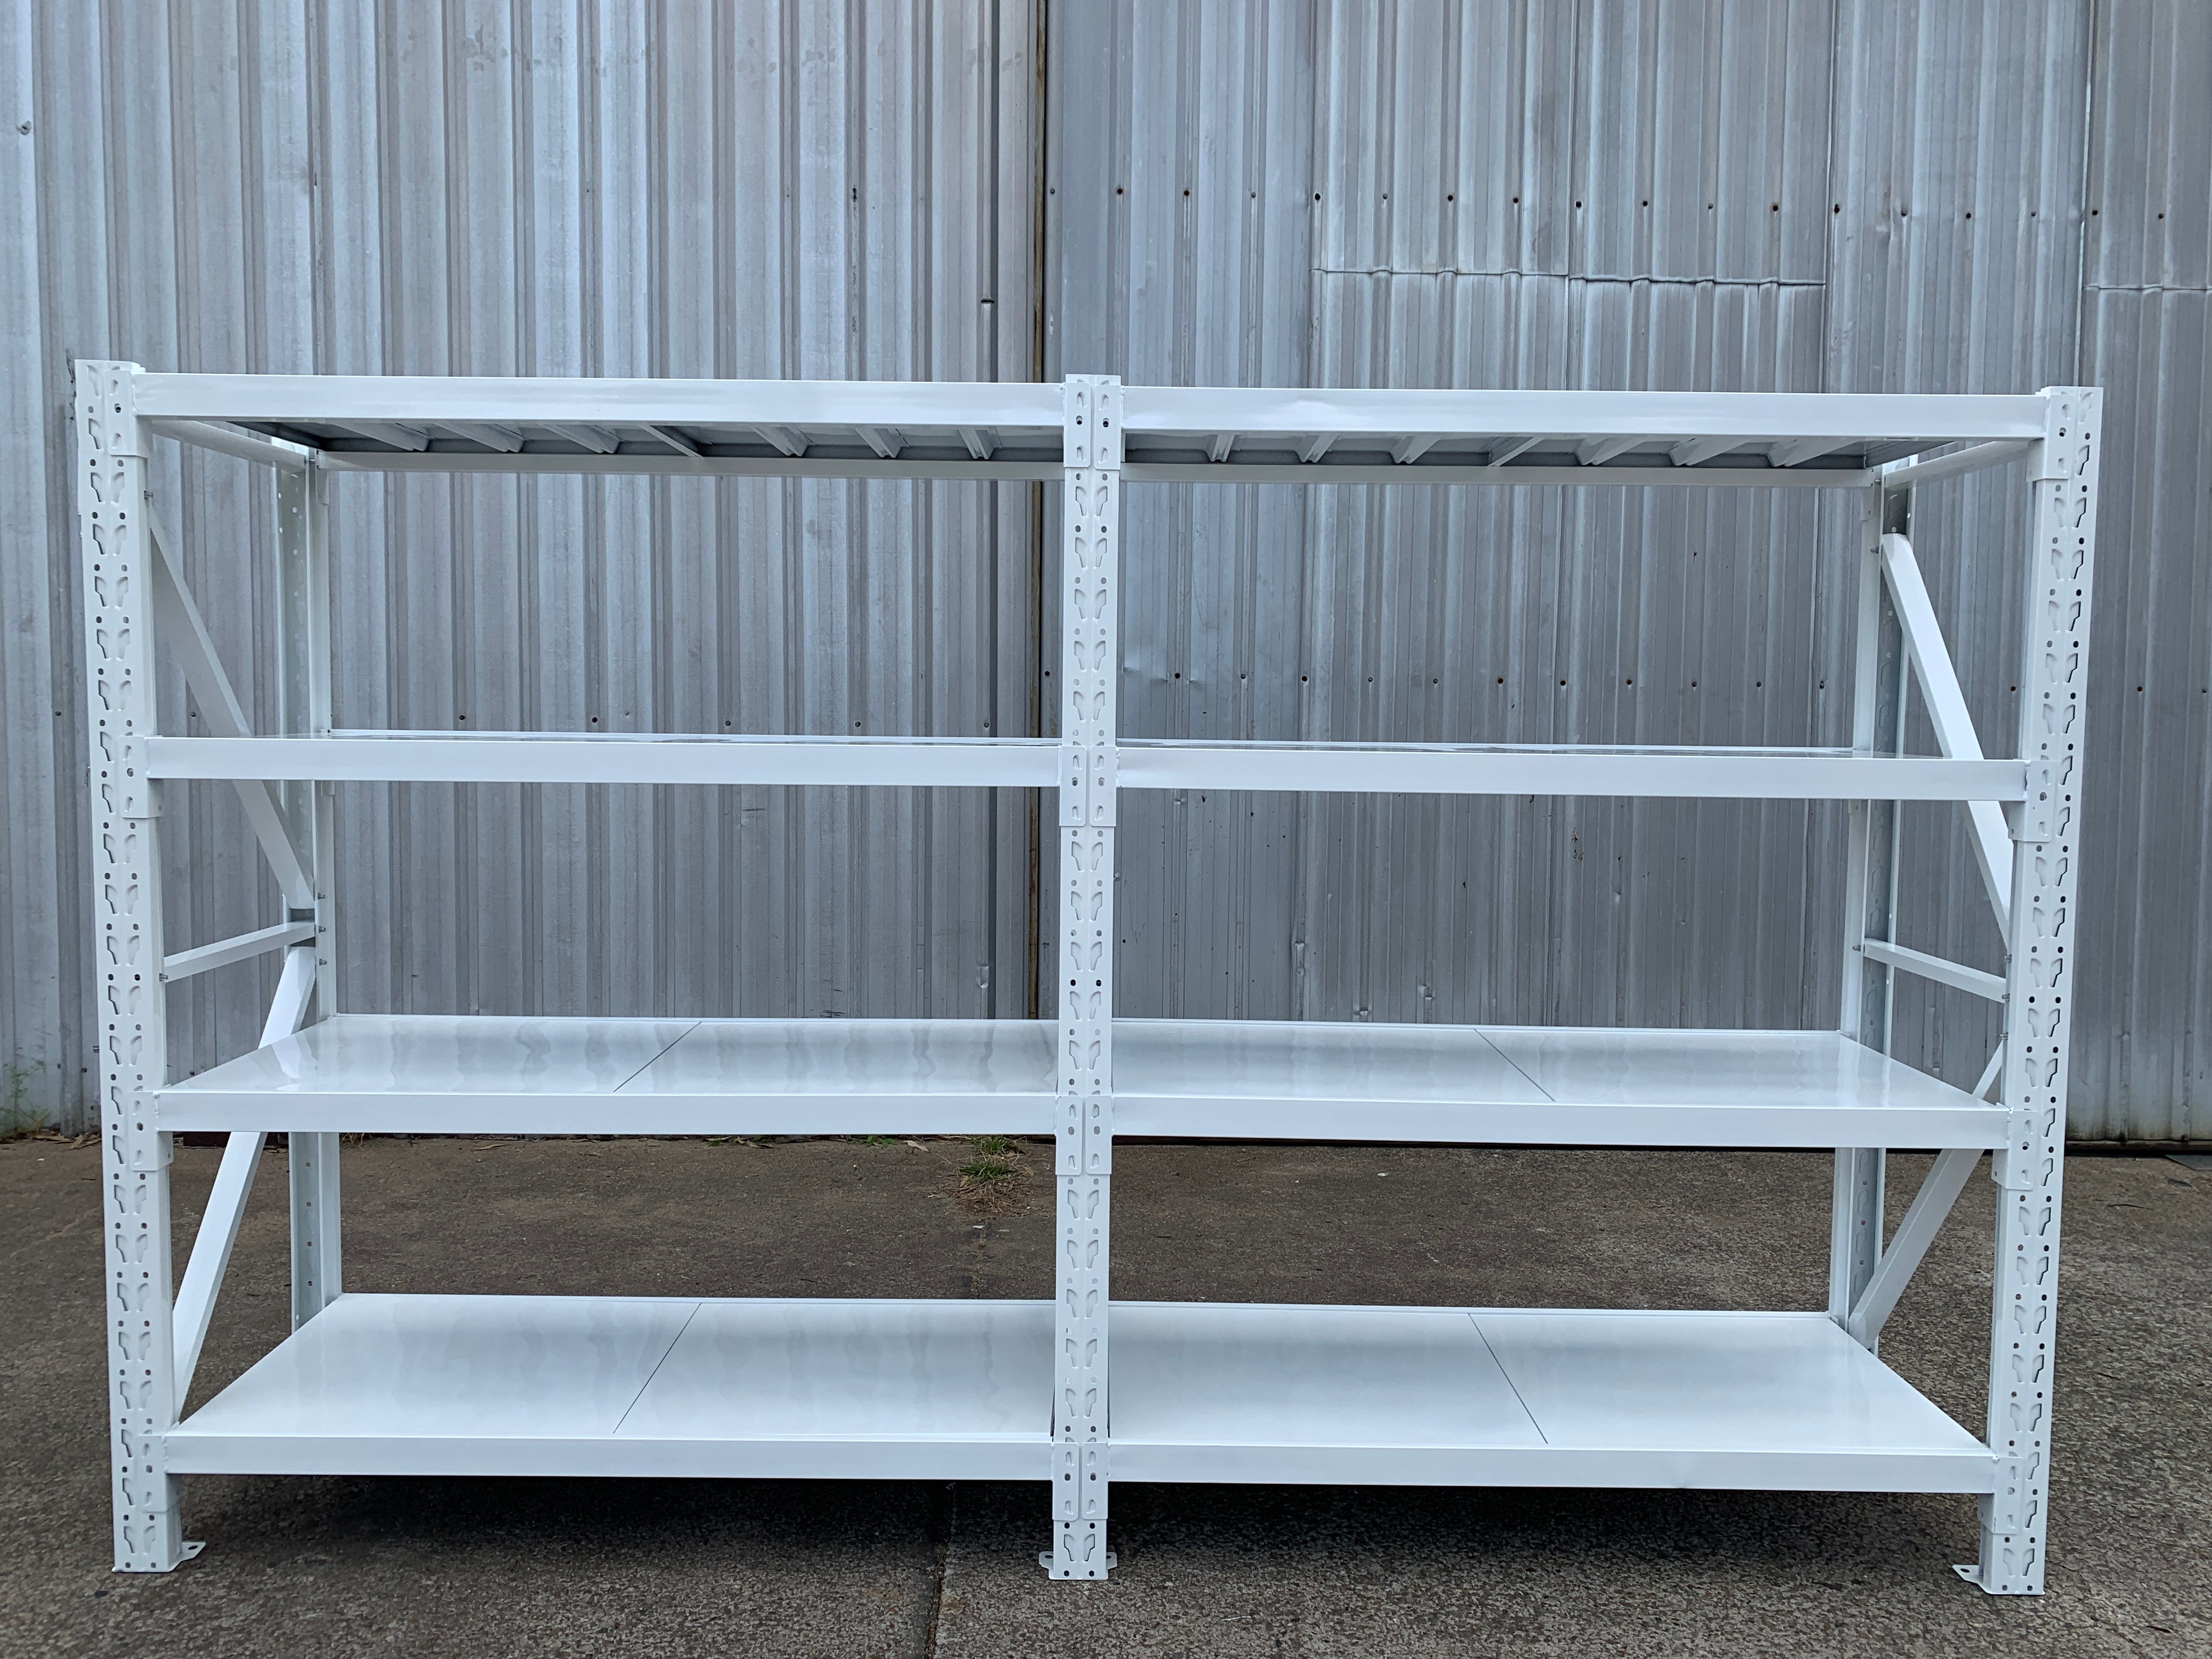 3m Wide Connecting Shelving - Solid World Pty Ltd